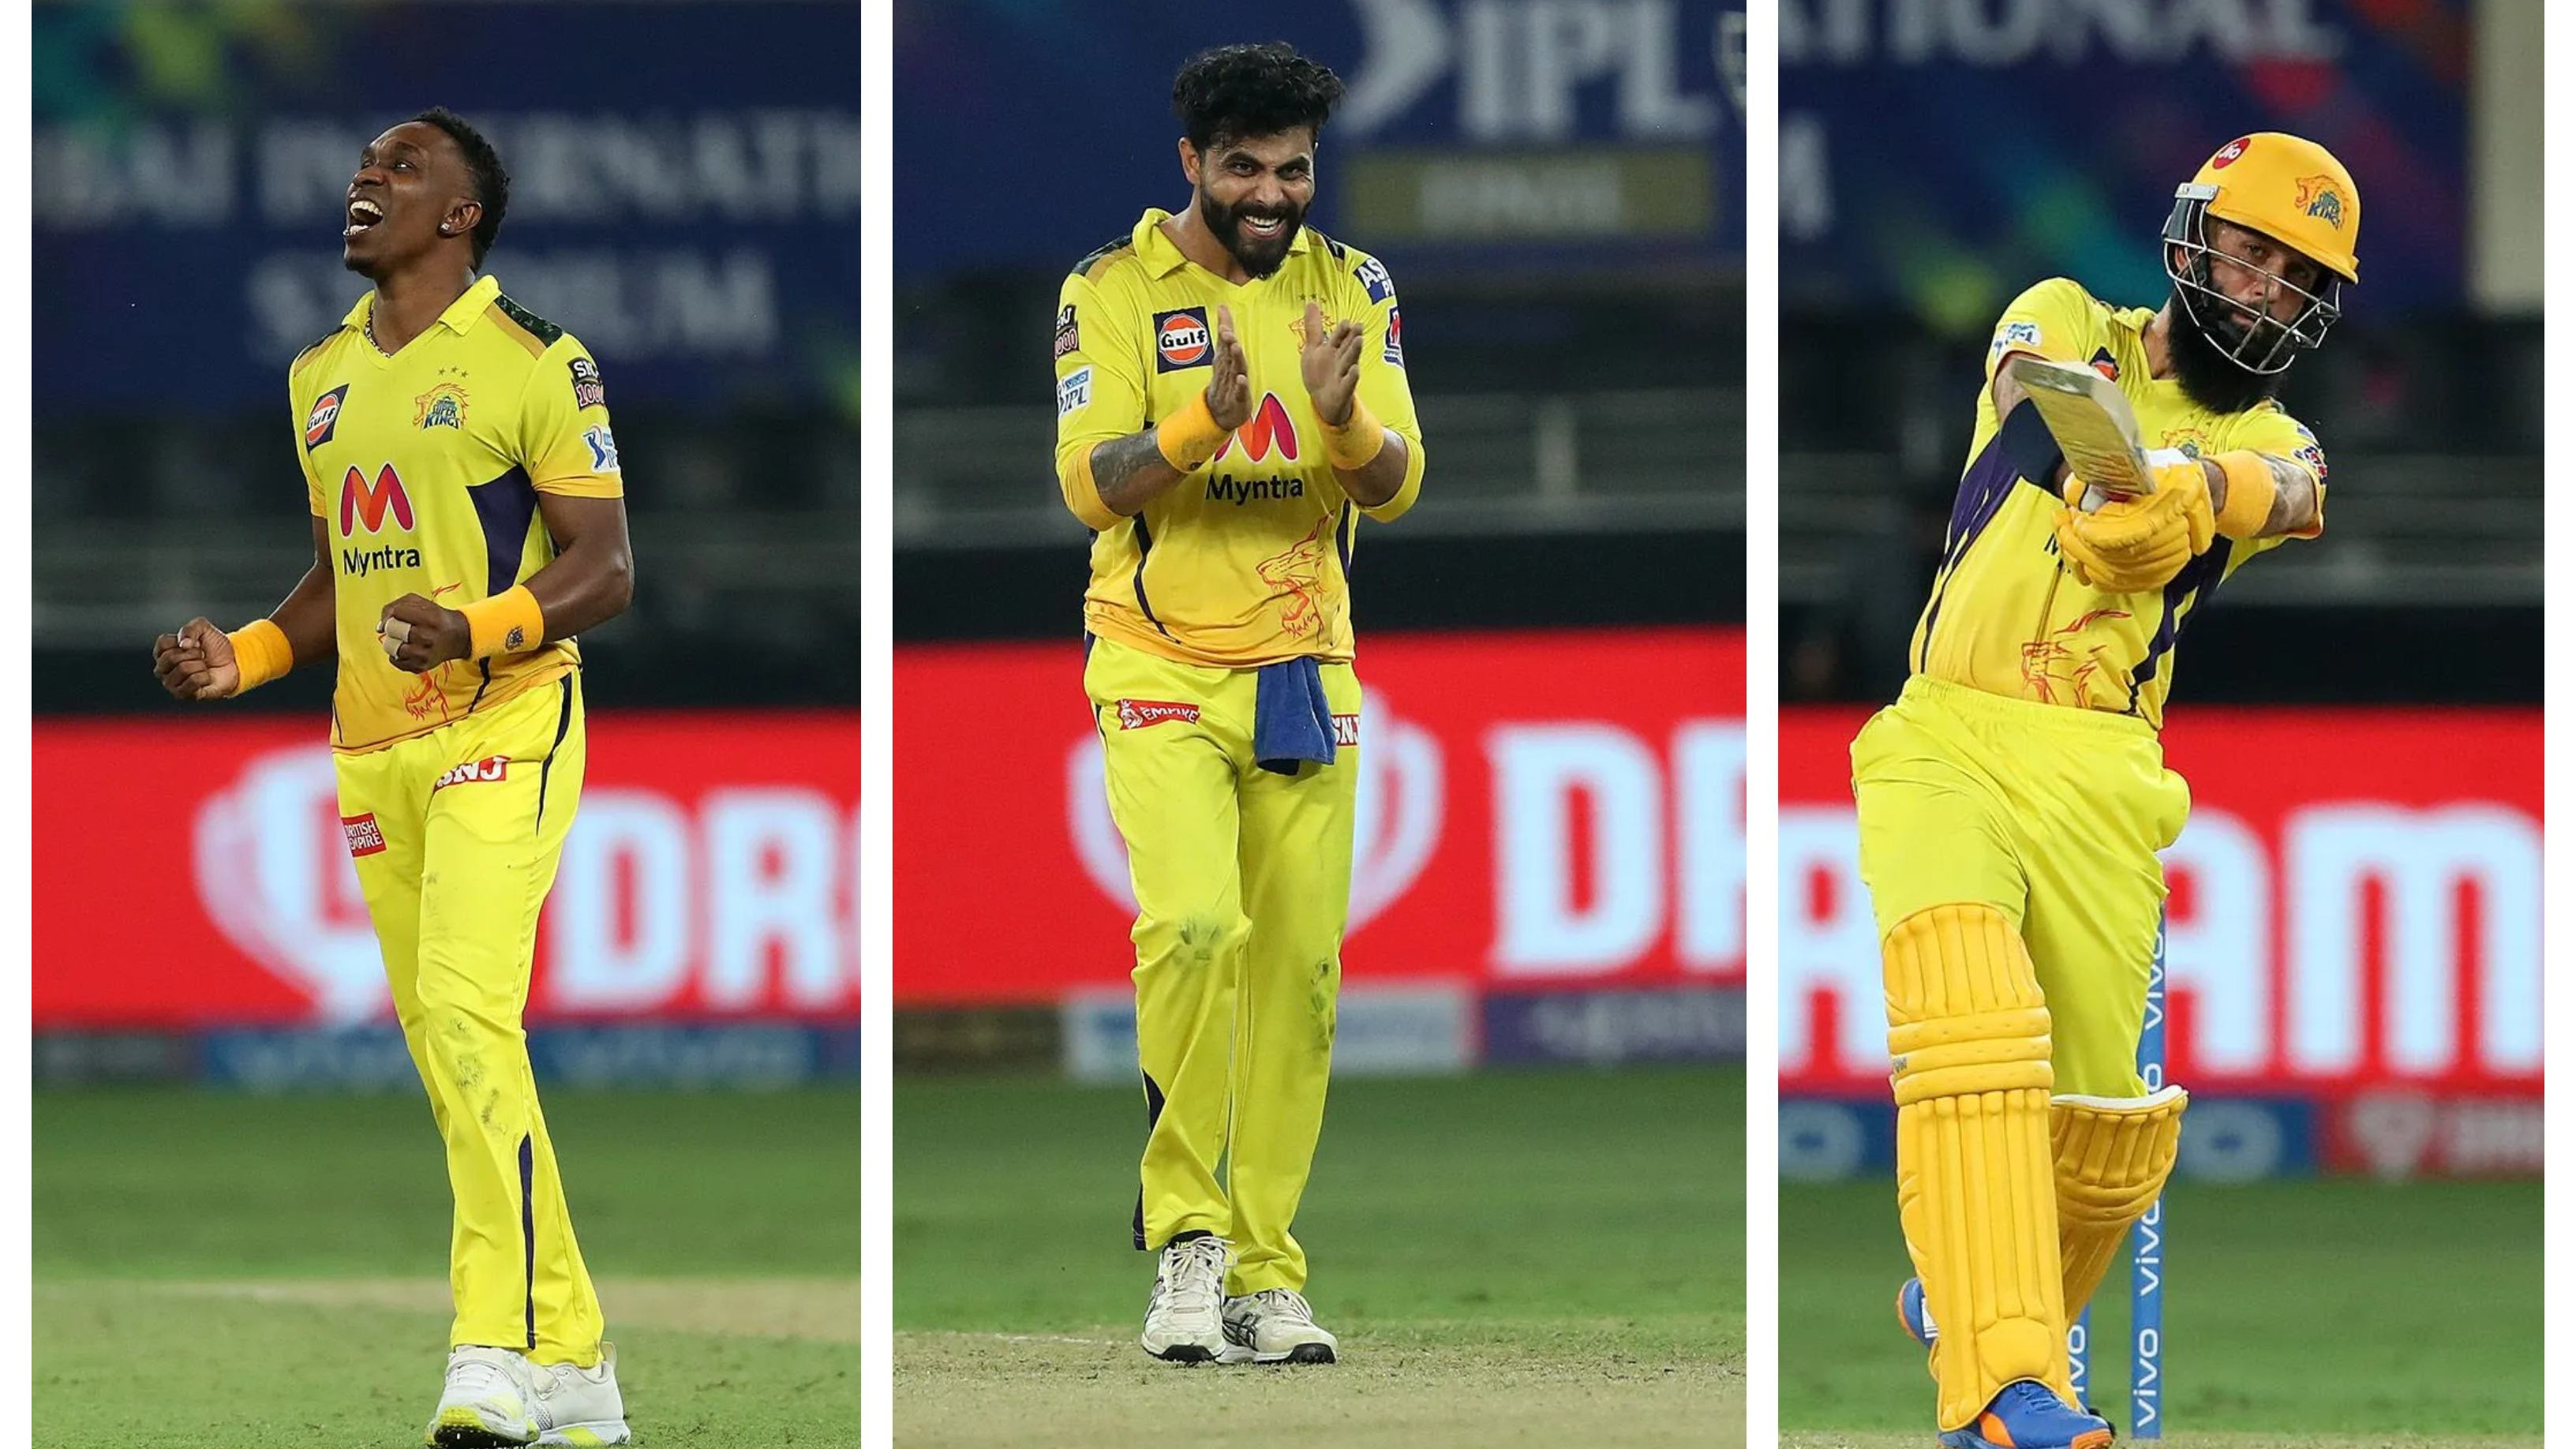 IPL 2021: CSK players react after beating KKR in the final to clinch IPL 14 title